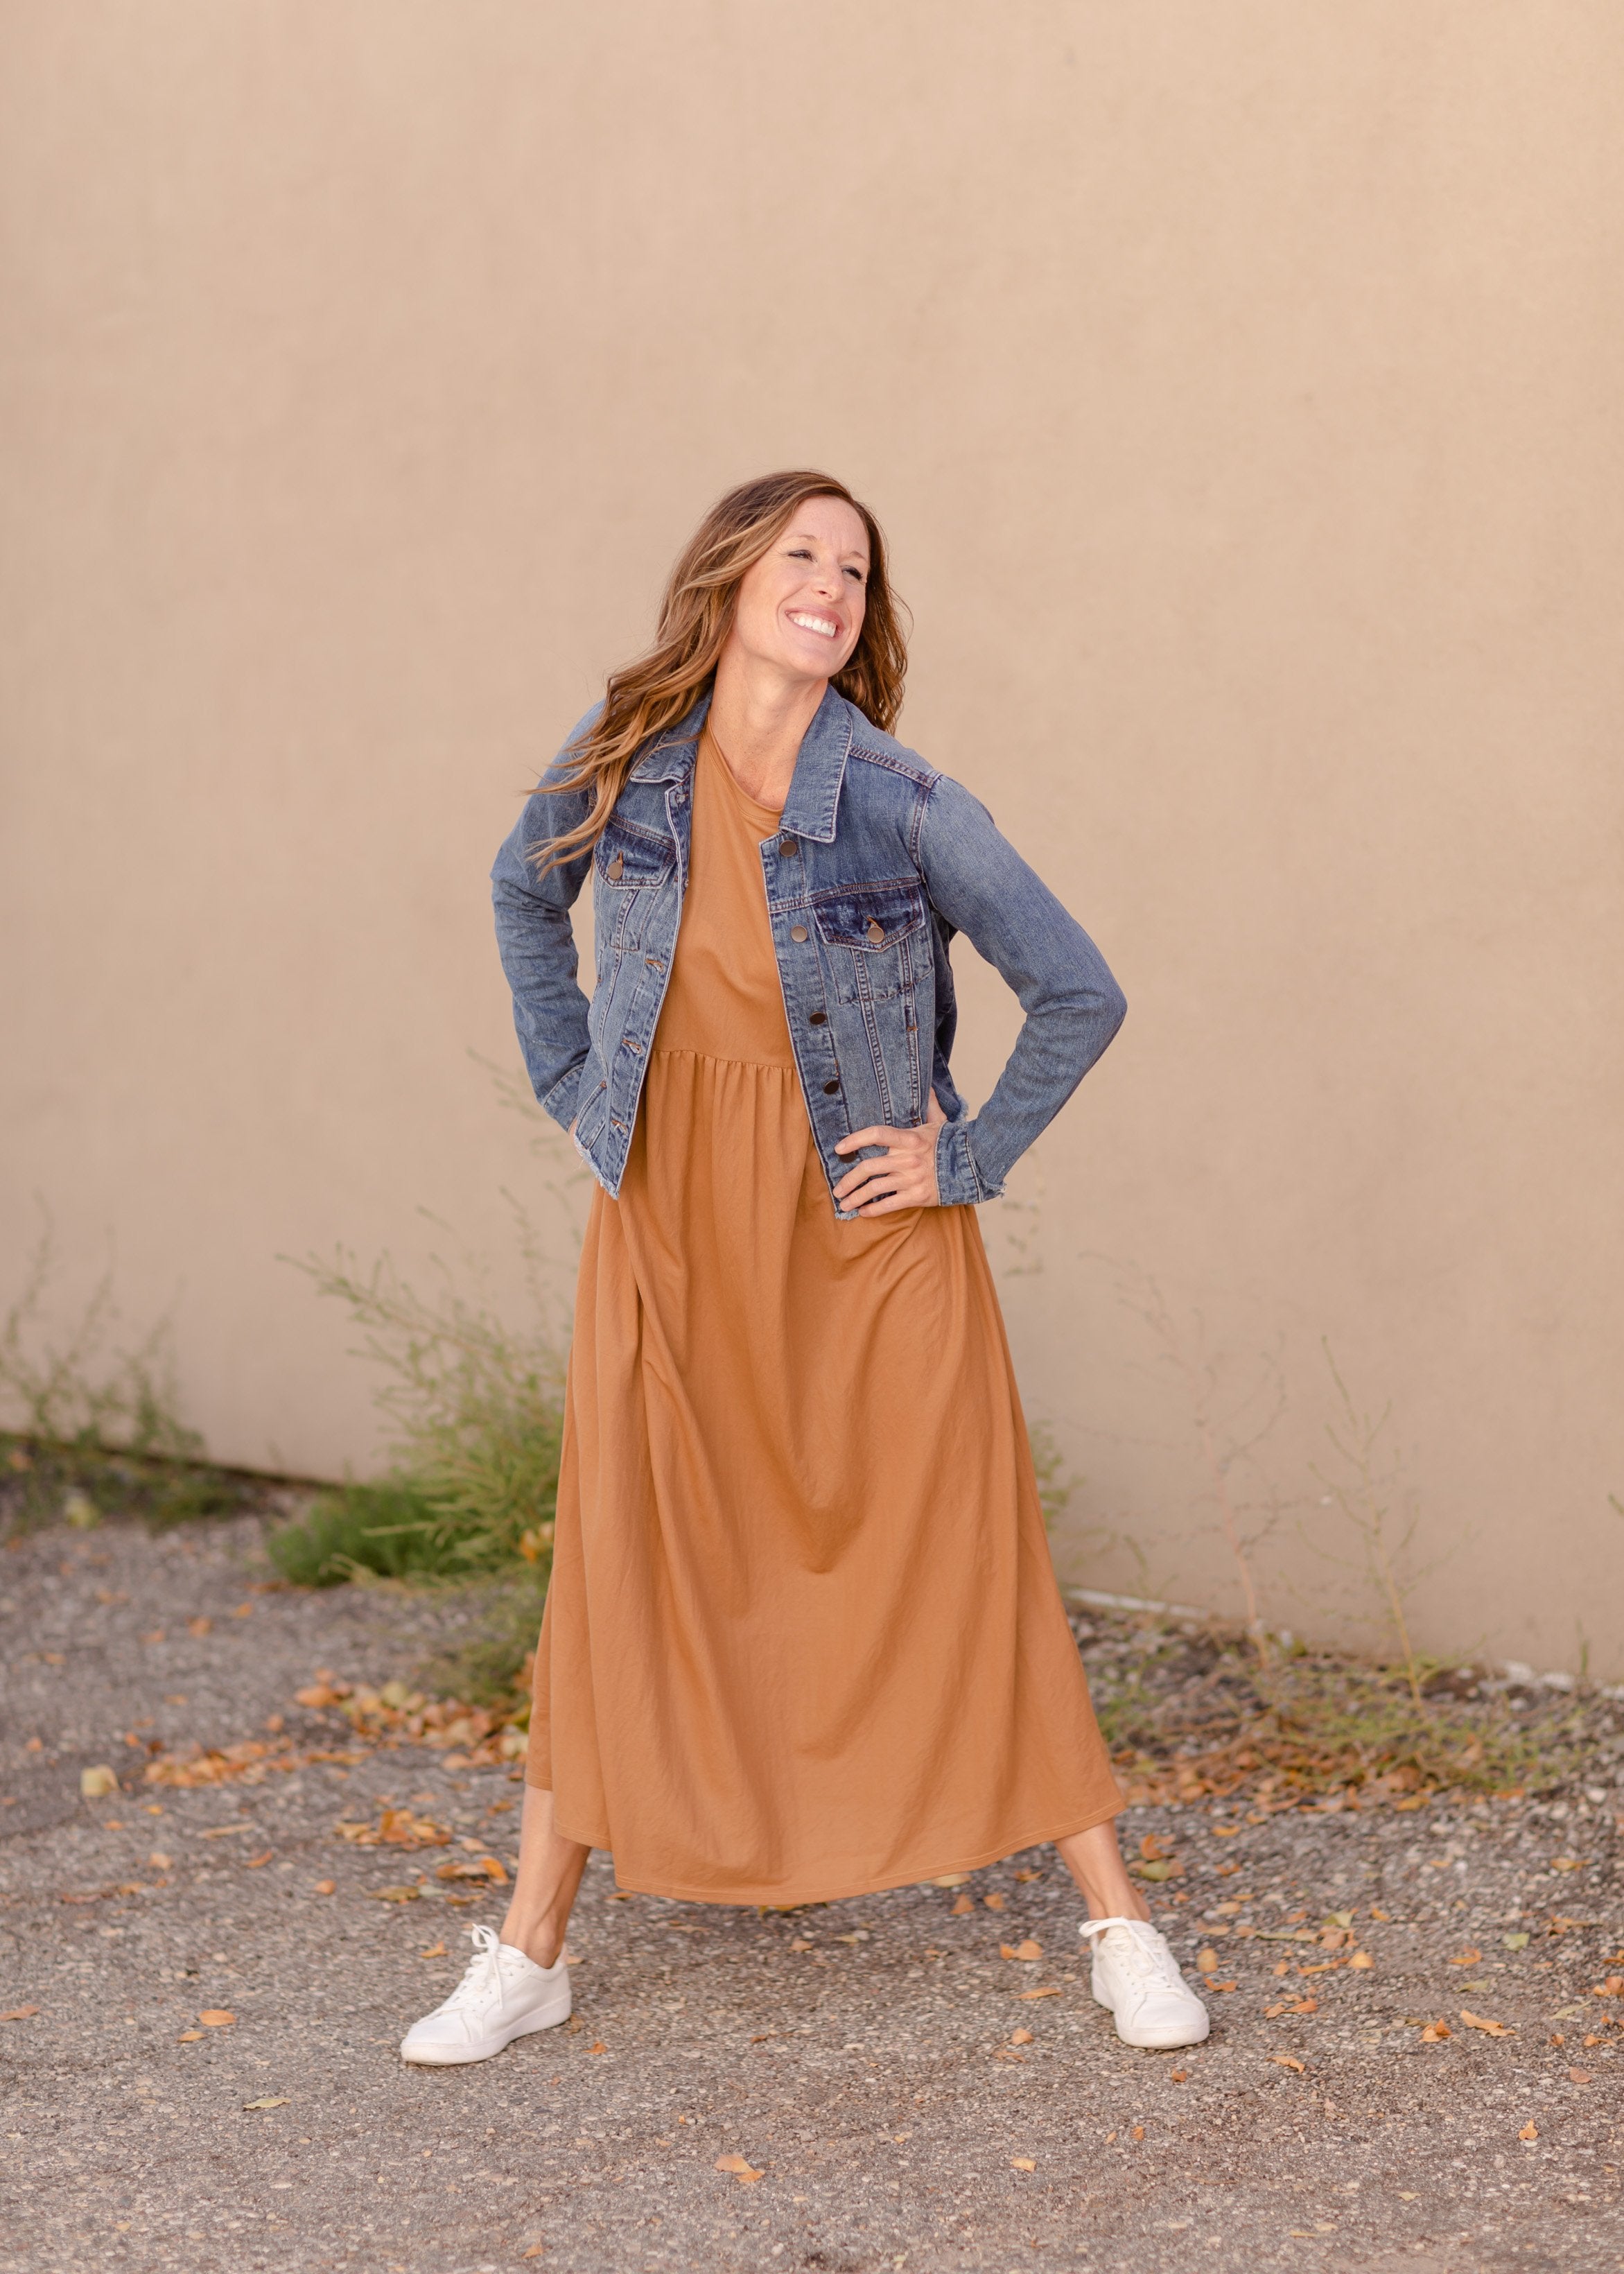 DENIM JACKET AND A MAXI DRESS - 50 IS NOT OLD - A Fashion And Beauty Blog  For Women Over 50